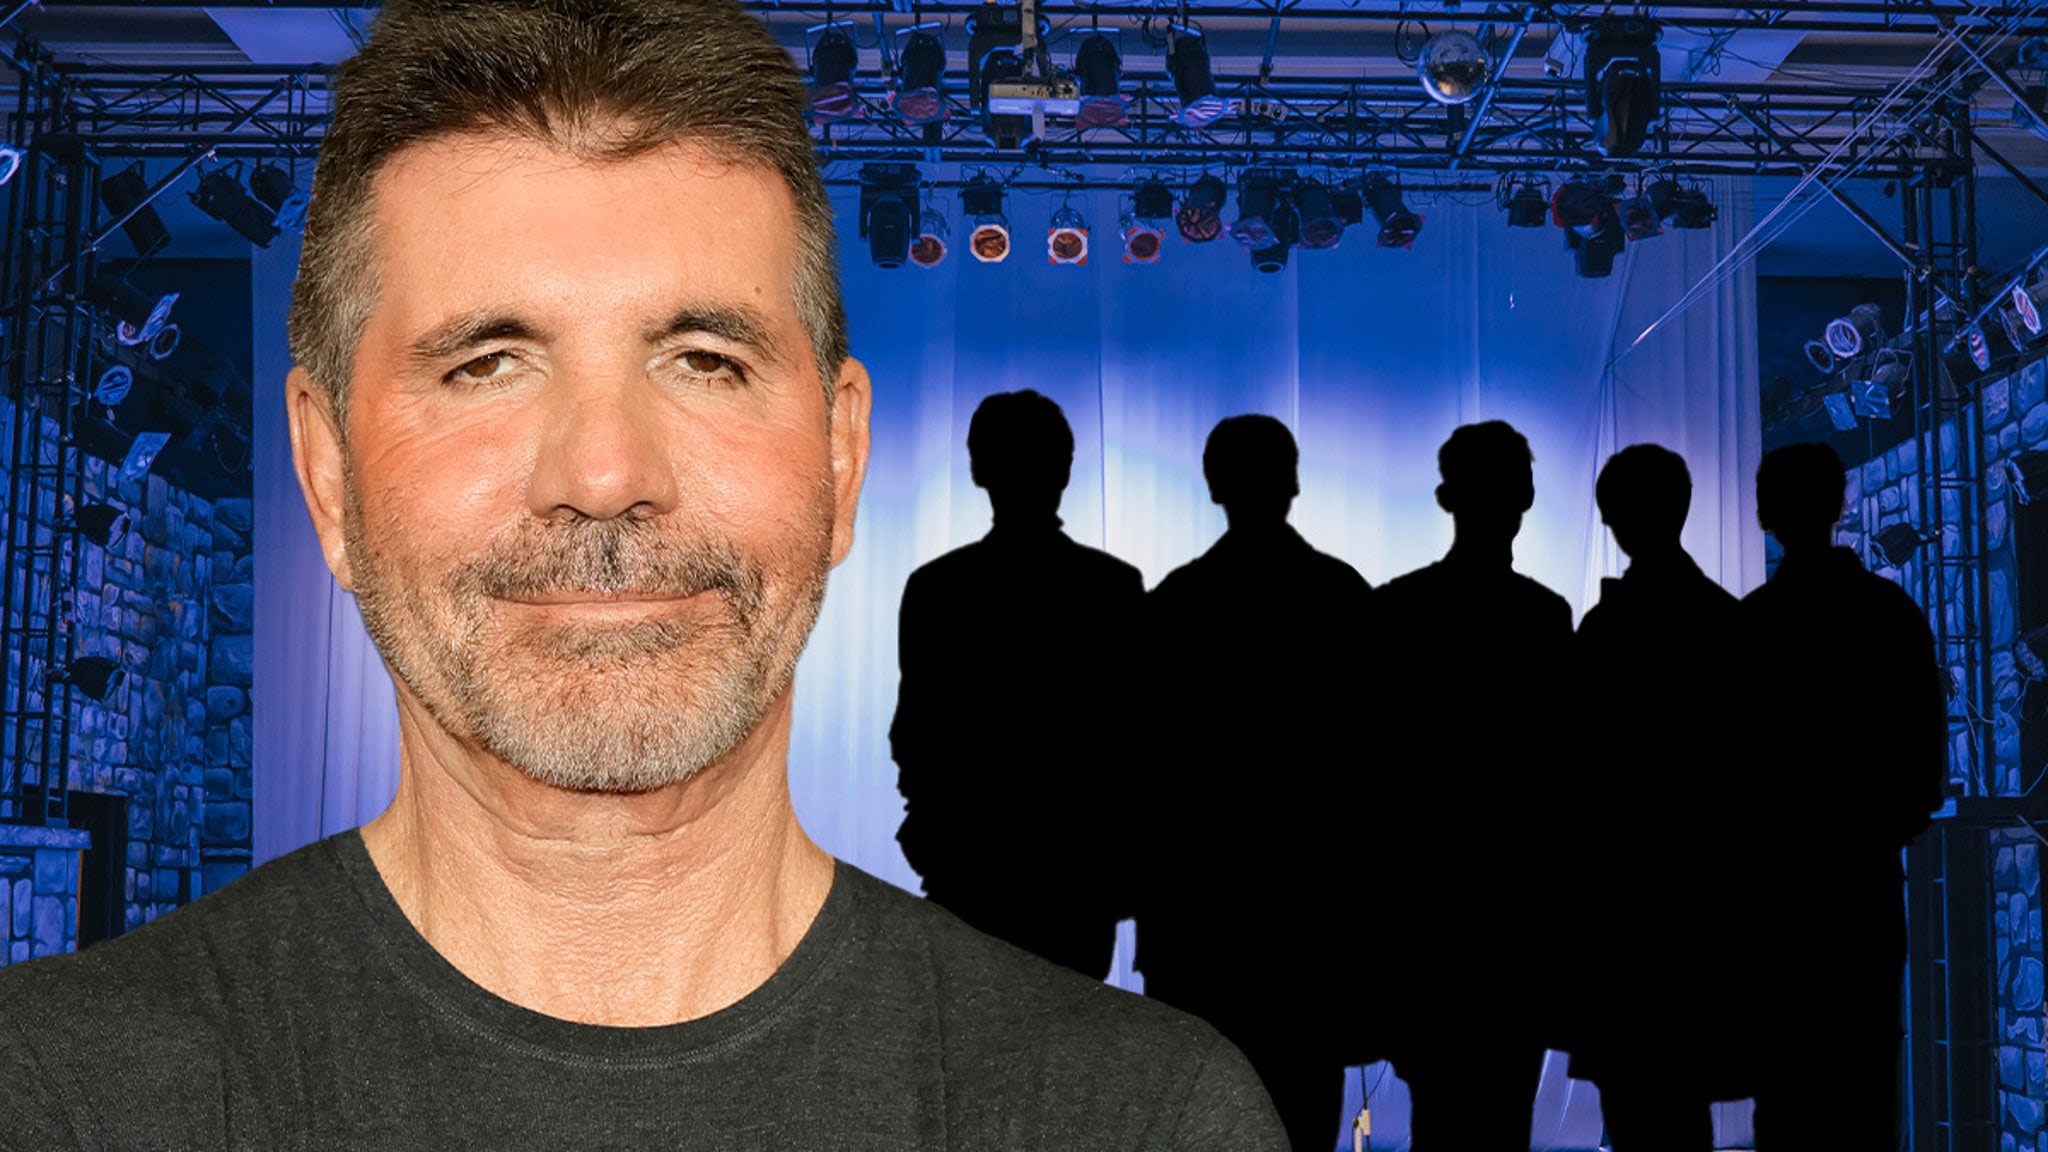 Simon Cowell Looking for Stars for New UK Boy Band